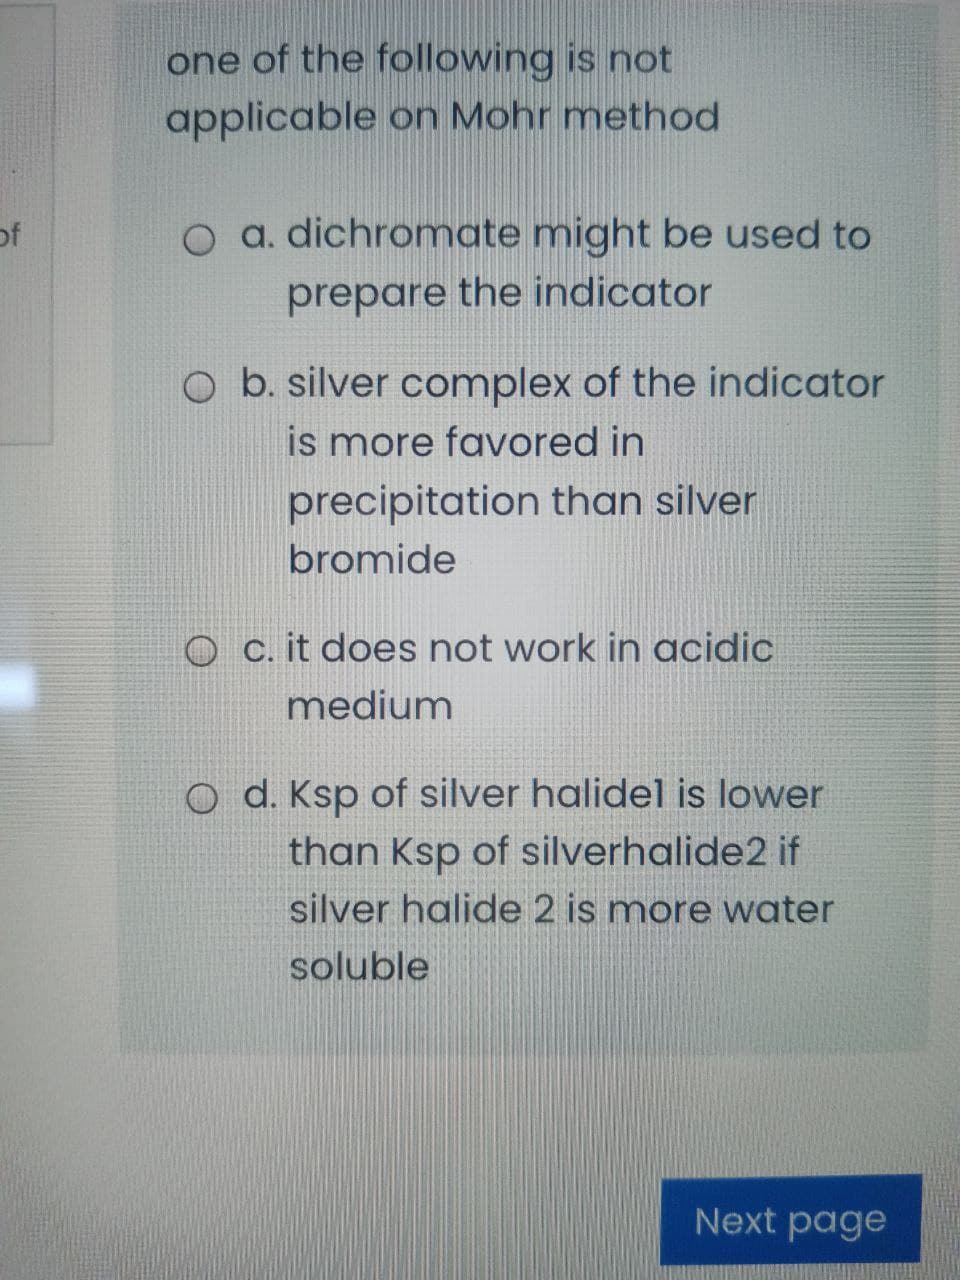 one of the following is not
applicable on Mohr method
of
O a. dichromate might be used to
prepare the indicator
O b. silver complex of the indicator
is more favored in
precipitation than silver
bromide
O c. it does not work in acidic
medium
O d. Ksp of silver halidel is lower
than Ksp of silverhalide2 if
silver halide 2 is more water
soluble
Next page
